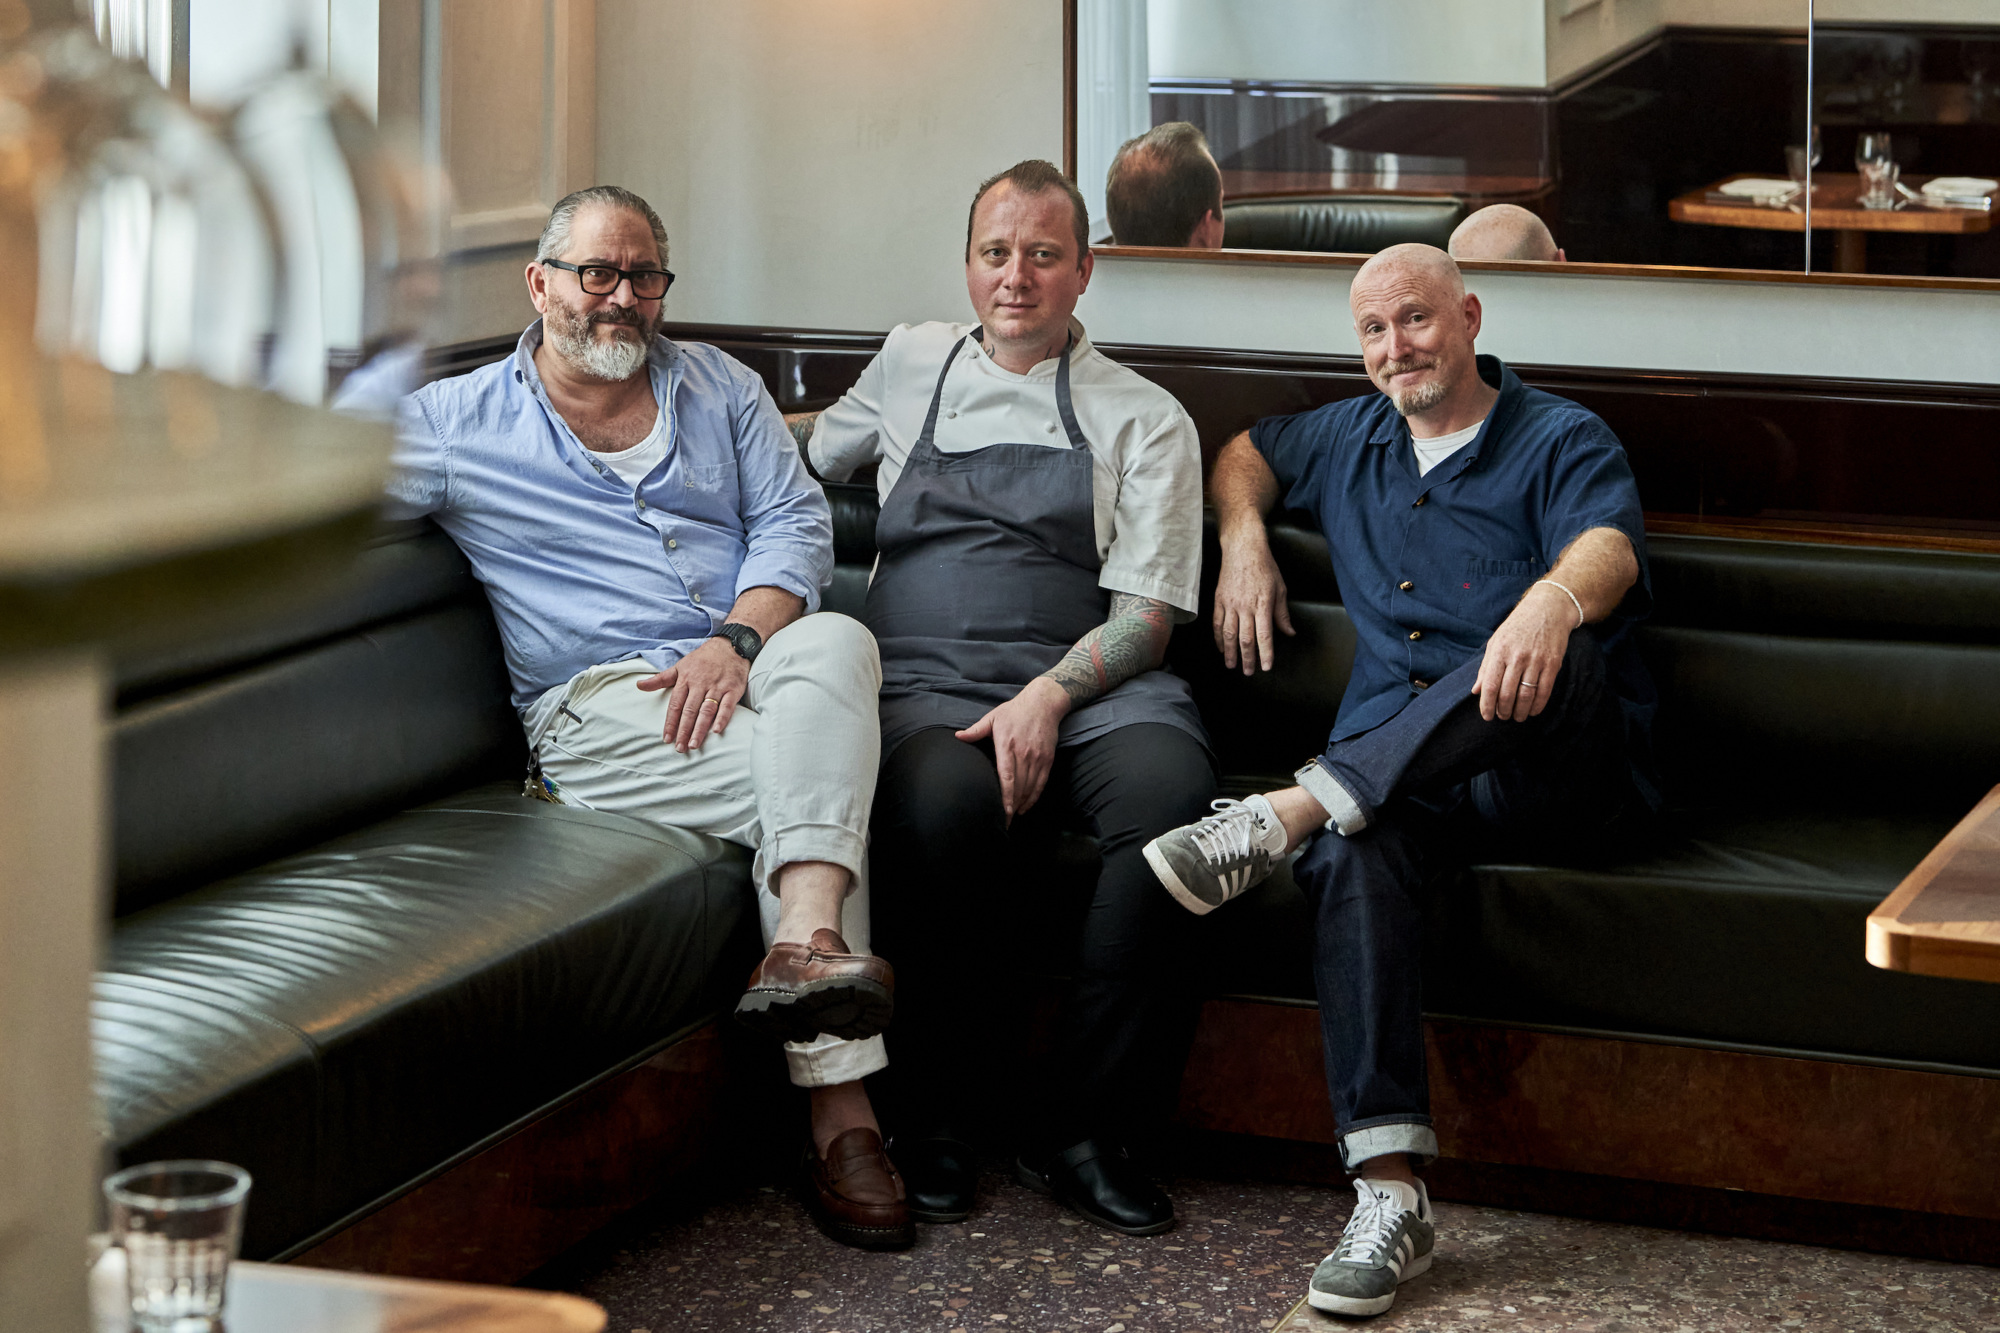 From left to right: chefs Riad Nasr, Walker Stern, and Lee Hanson.